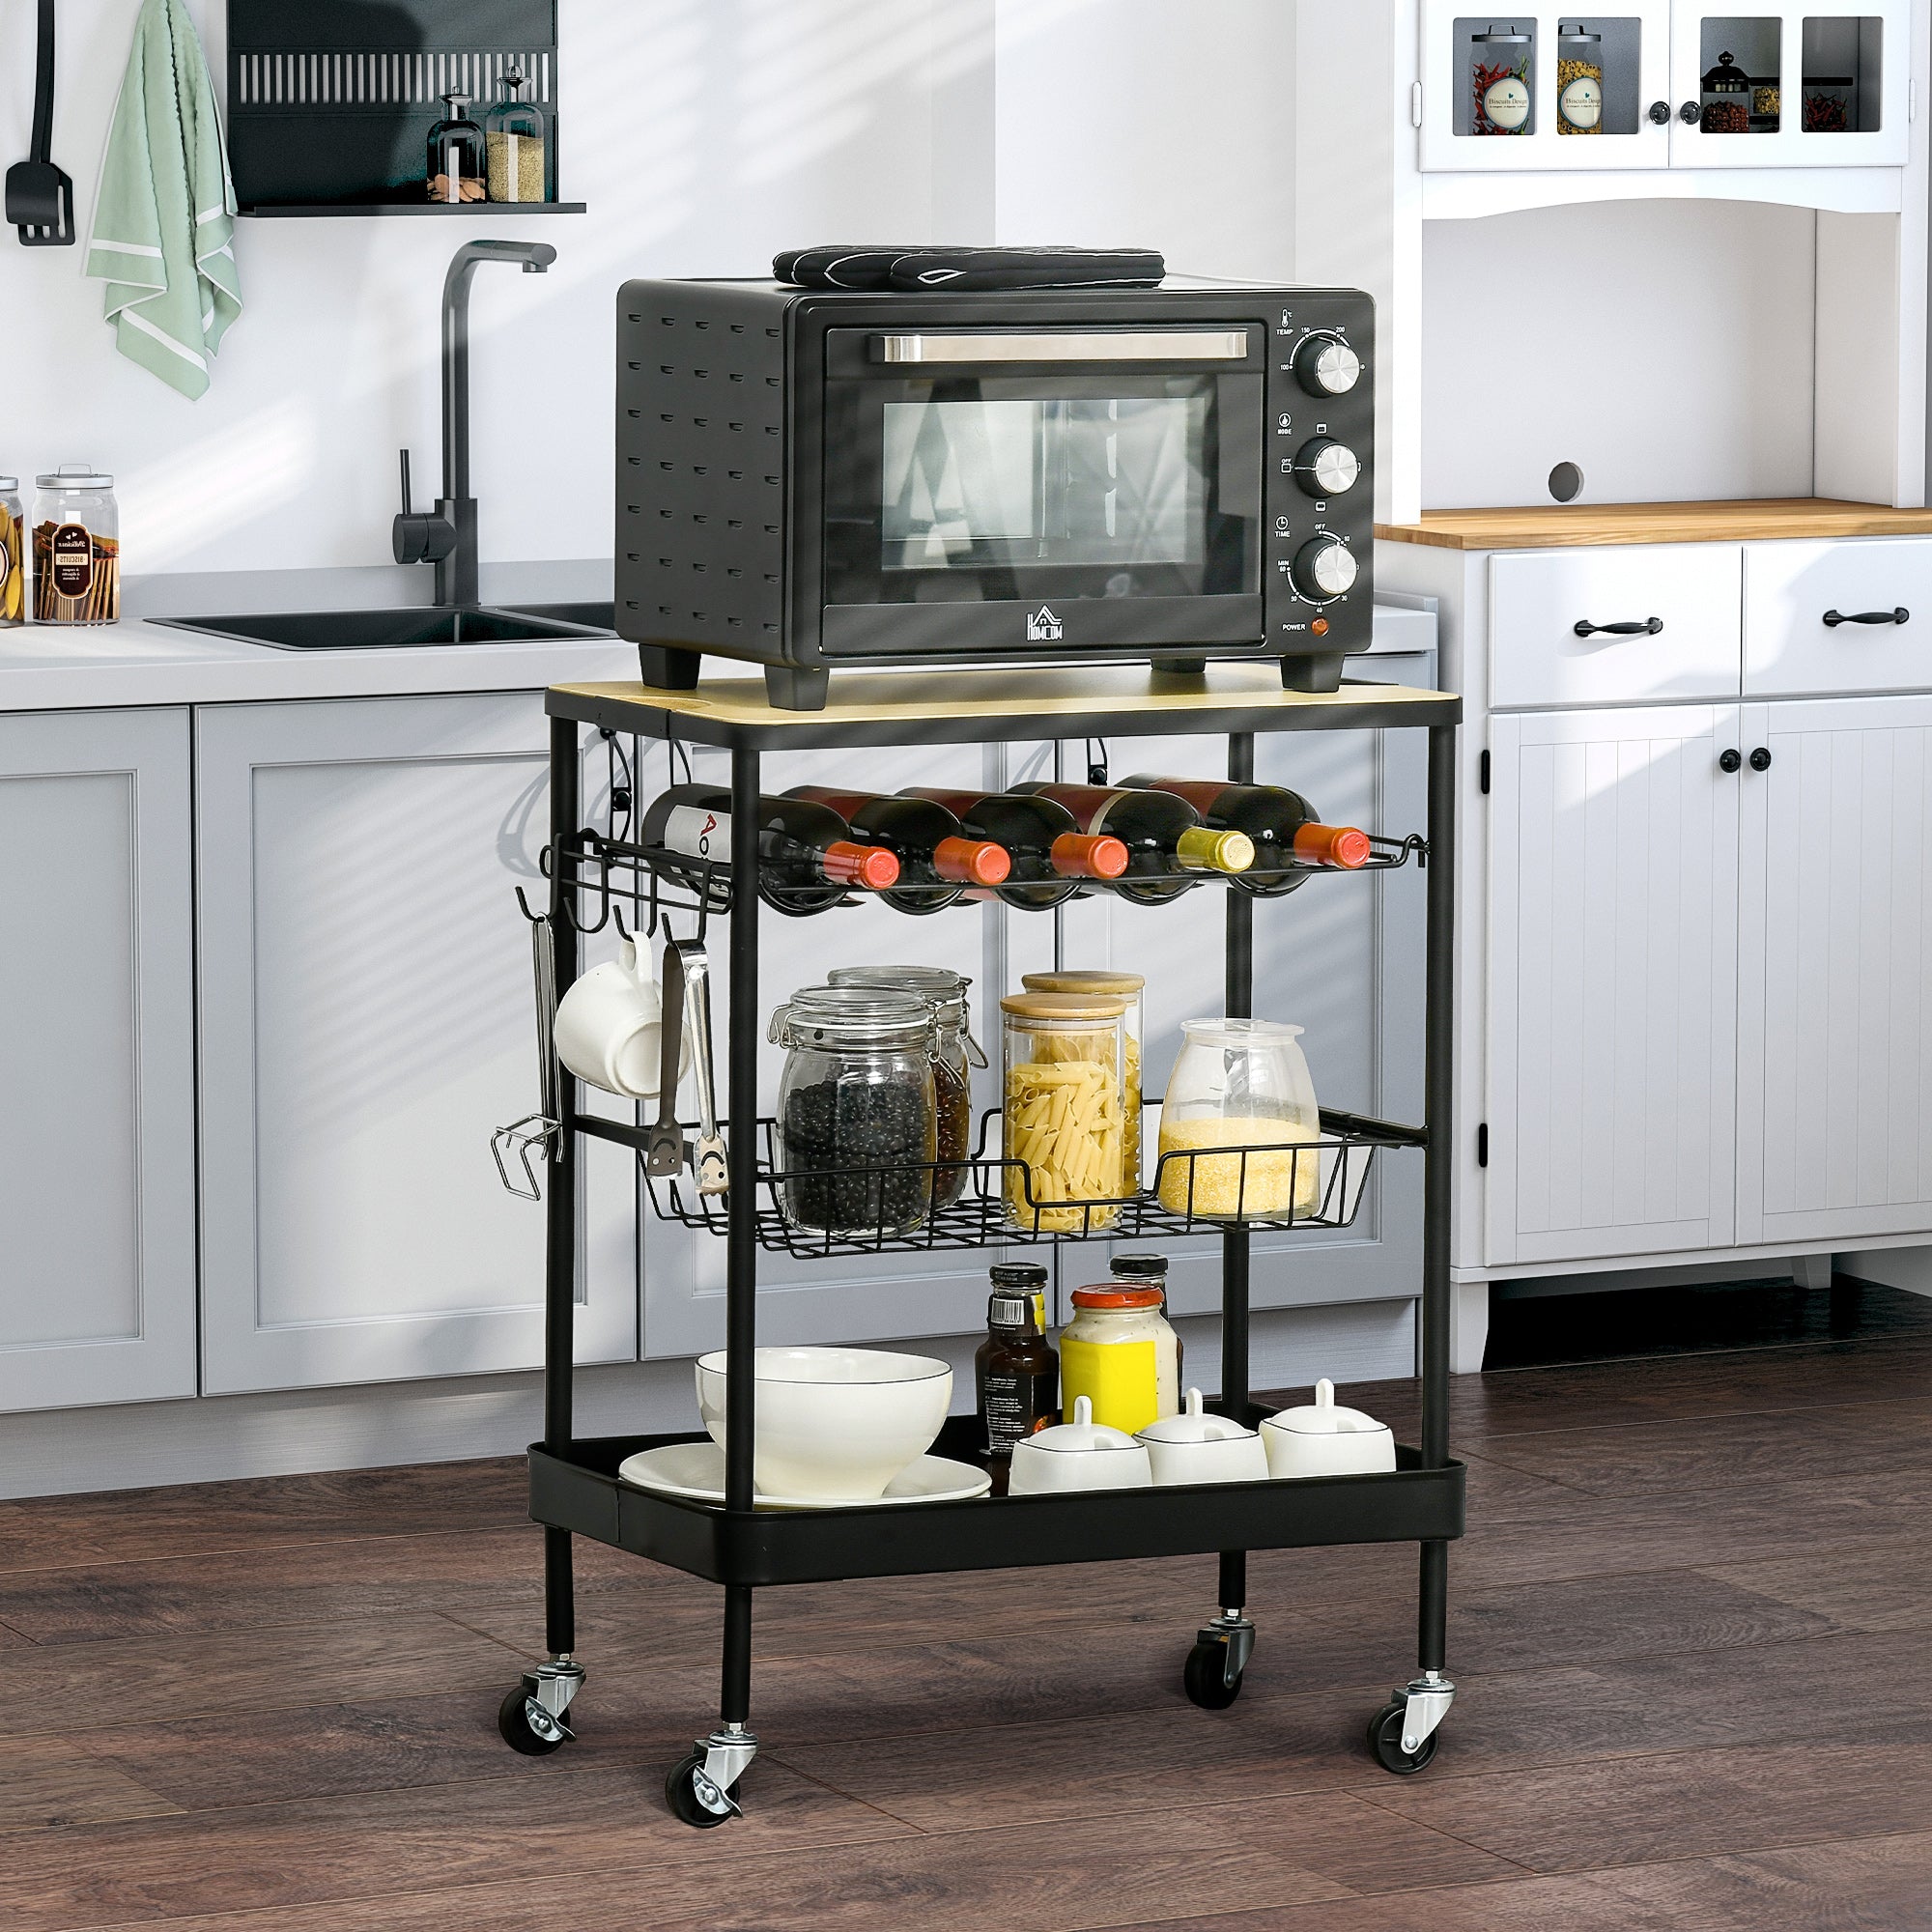 HOMCOM Rolling Kitchen Cart， 3-Tier Utility Storage Trolley with Wine Rack， Mesh Drawer and Side Hooks for Dining Room， Black/Natural